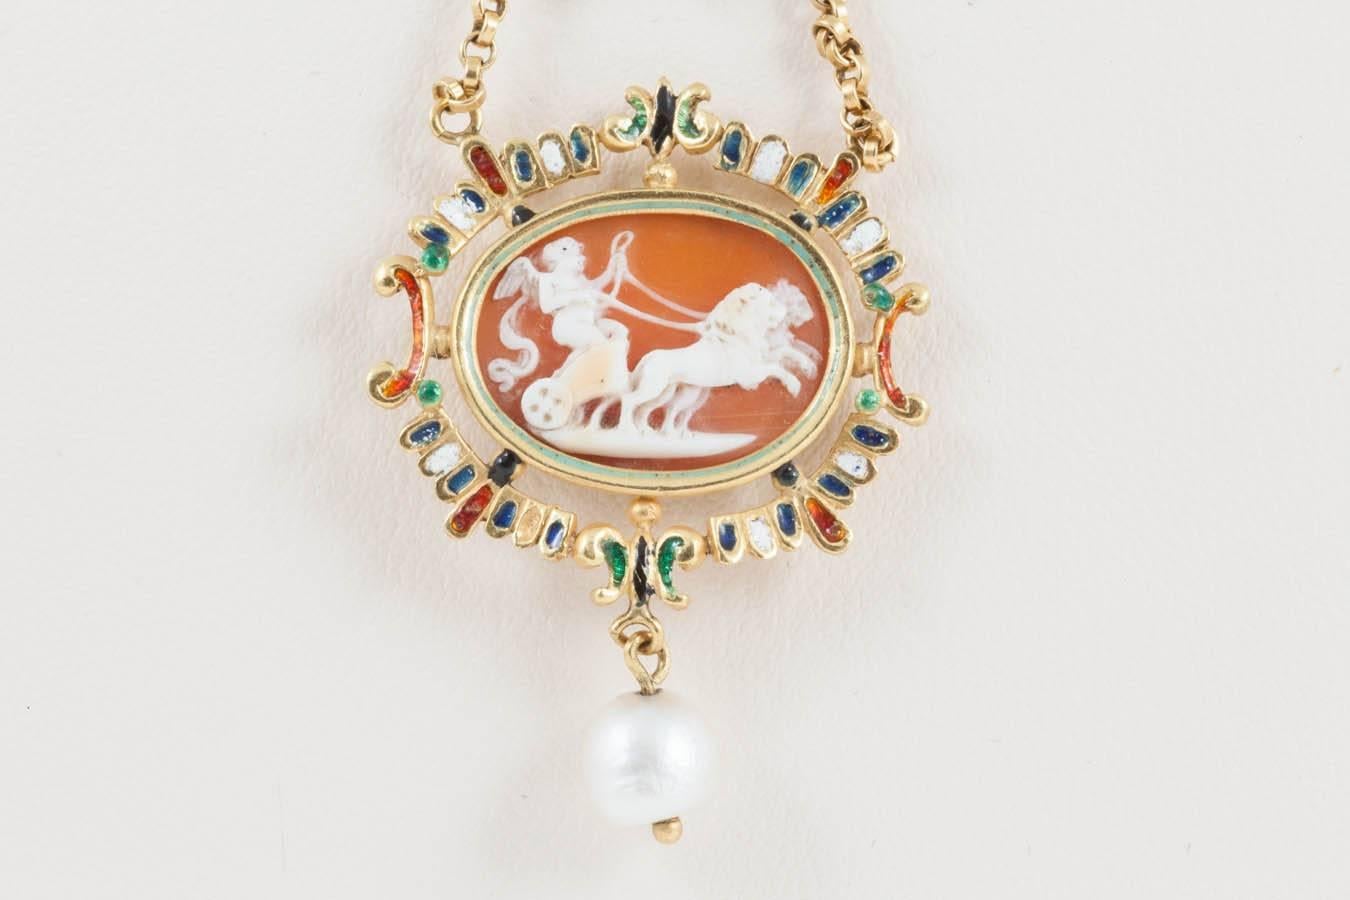 A 19th century copy of a Holbeinesque 16th century pendant. The eye on the reverse wards away evil. A charming hand carved cameo with the enamel surround and natural pearls are suspended. The central cabochon ruby is set to the bale. The style of